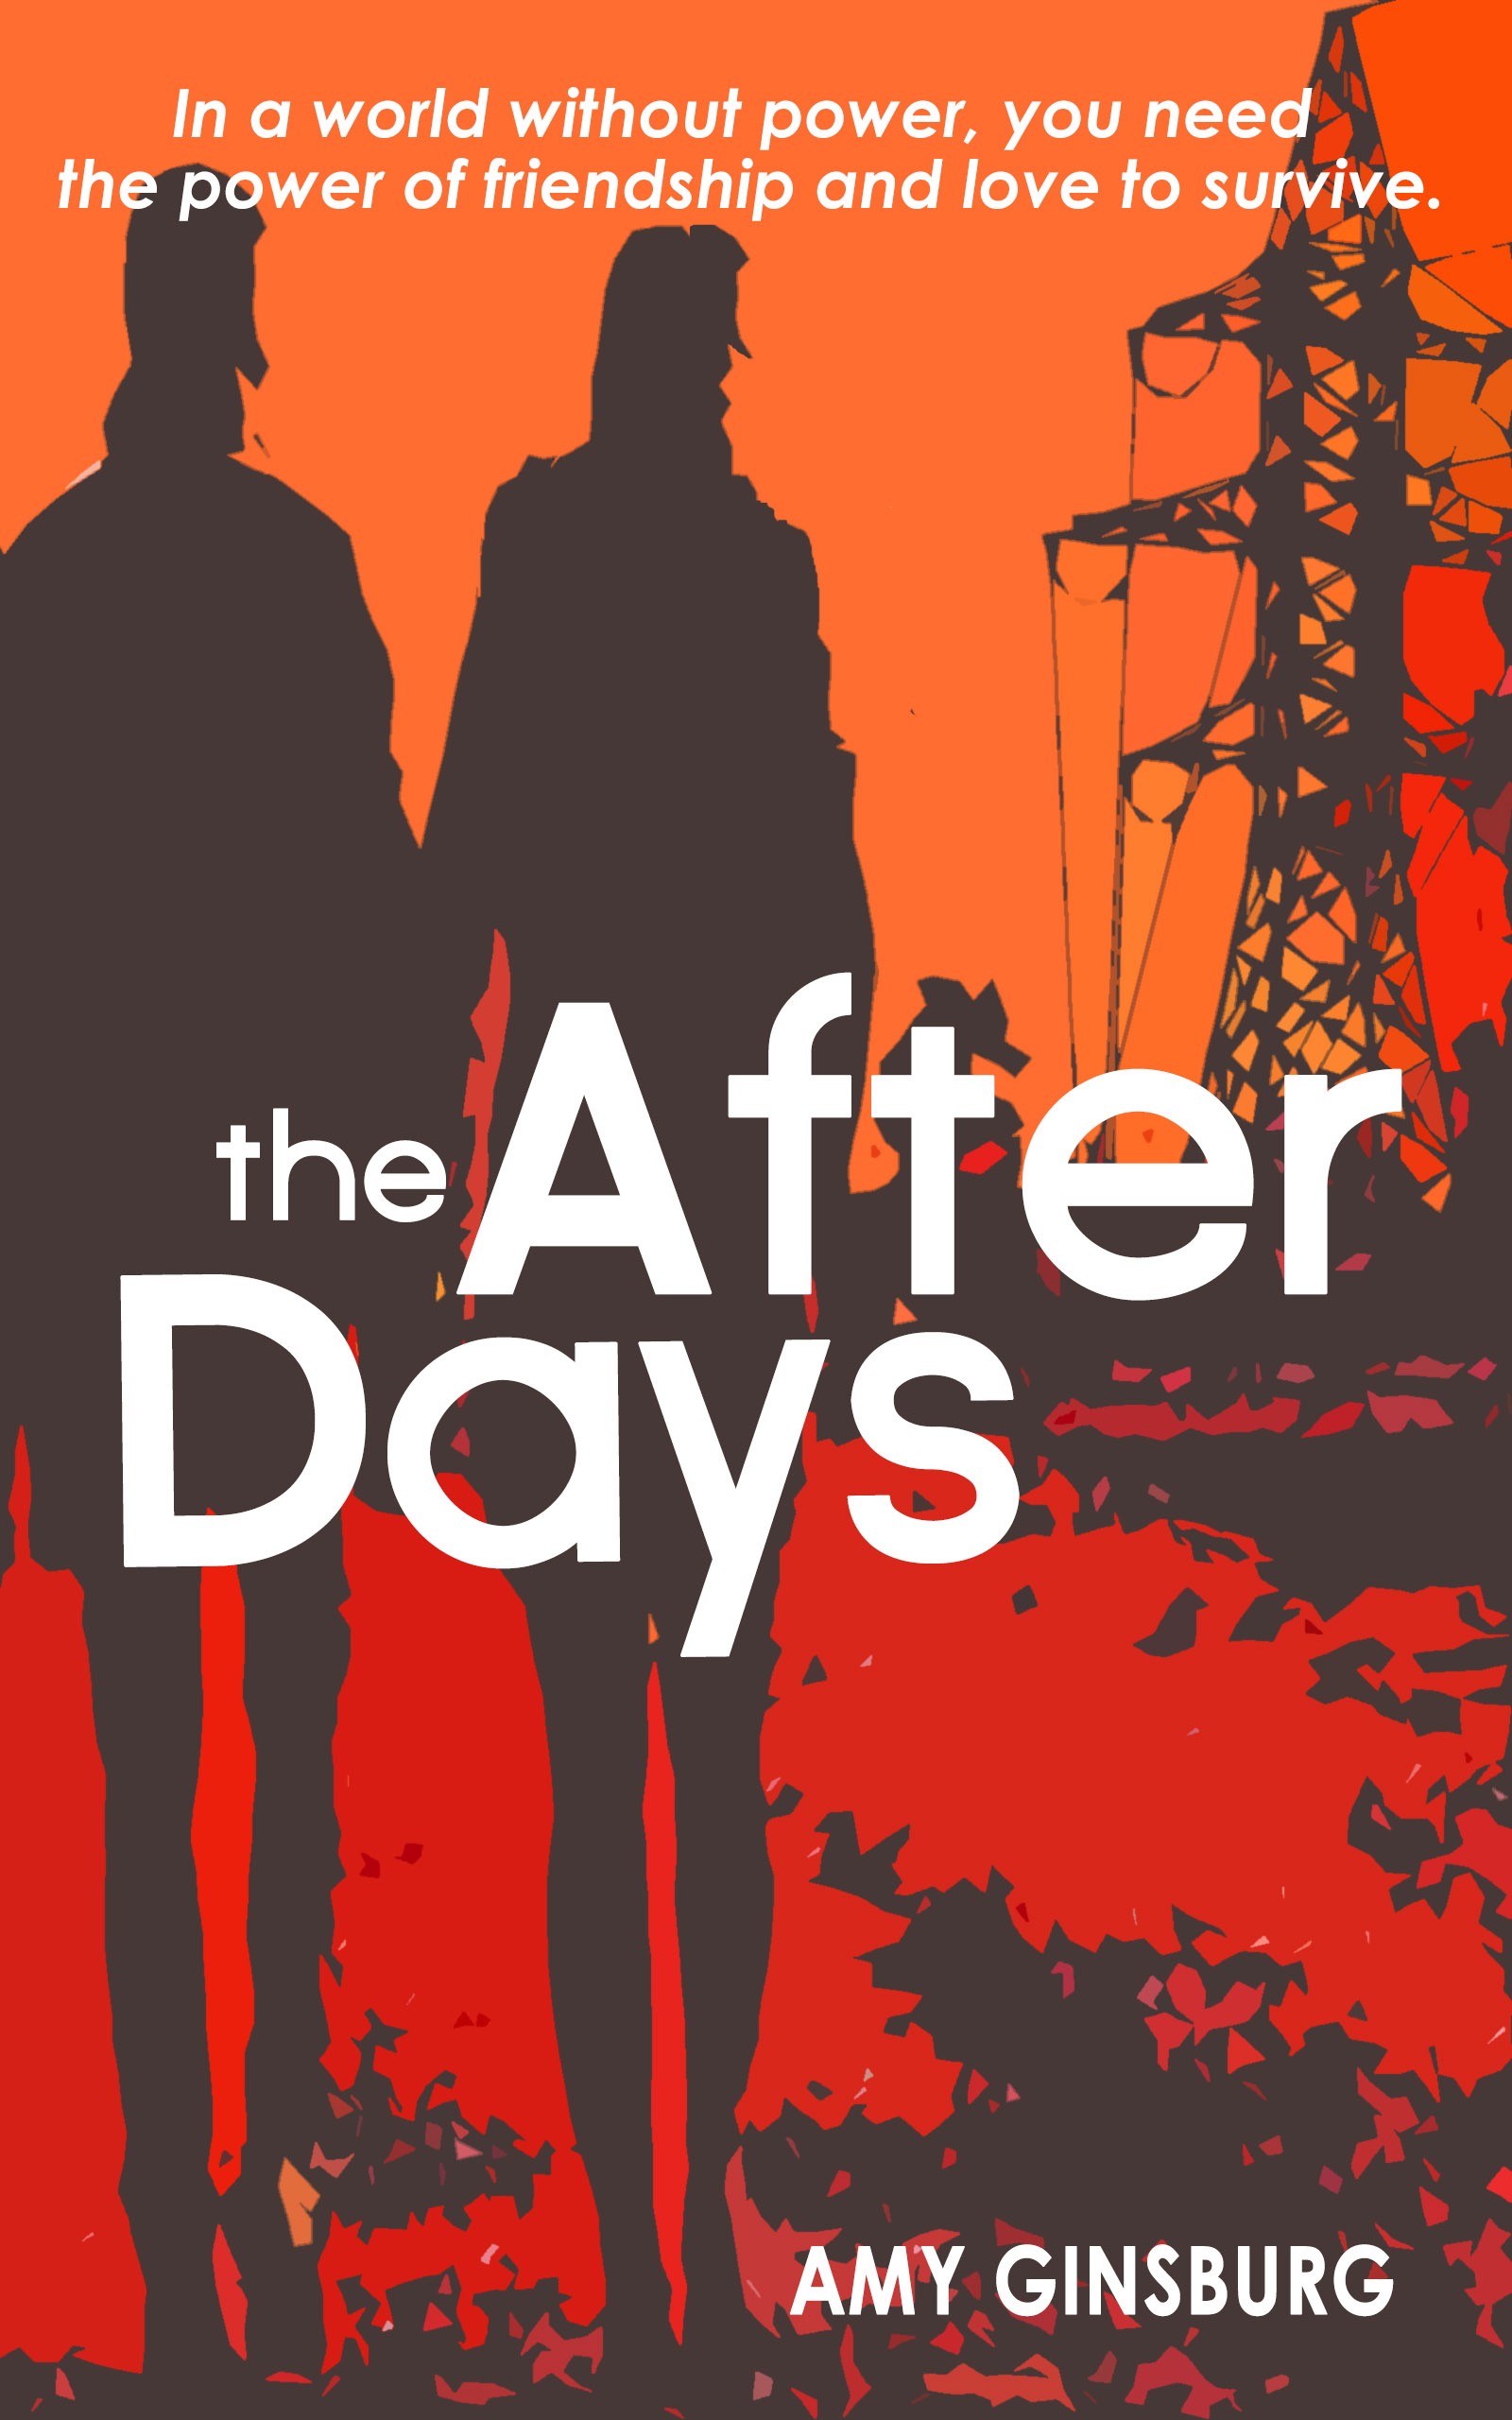 FREE: The After Days by Amy Ginsburg